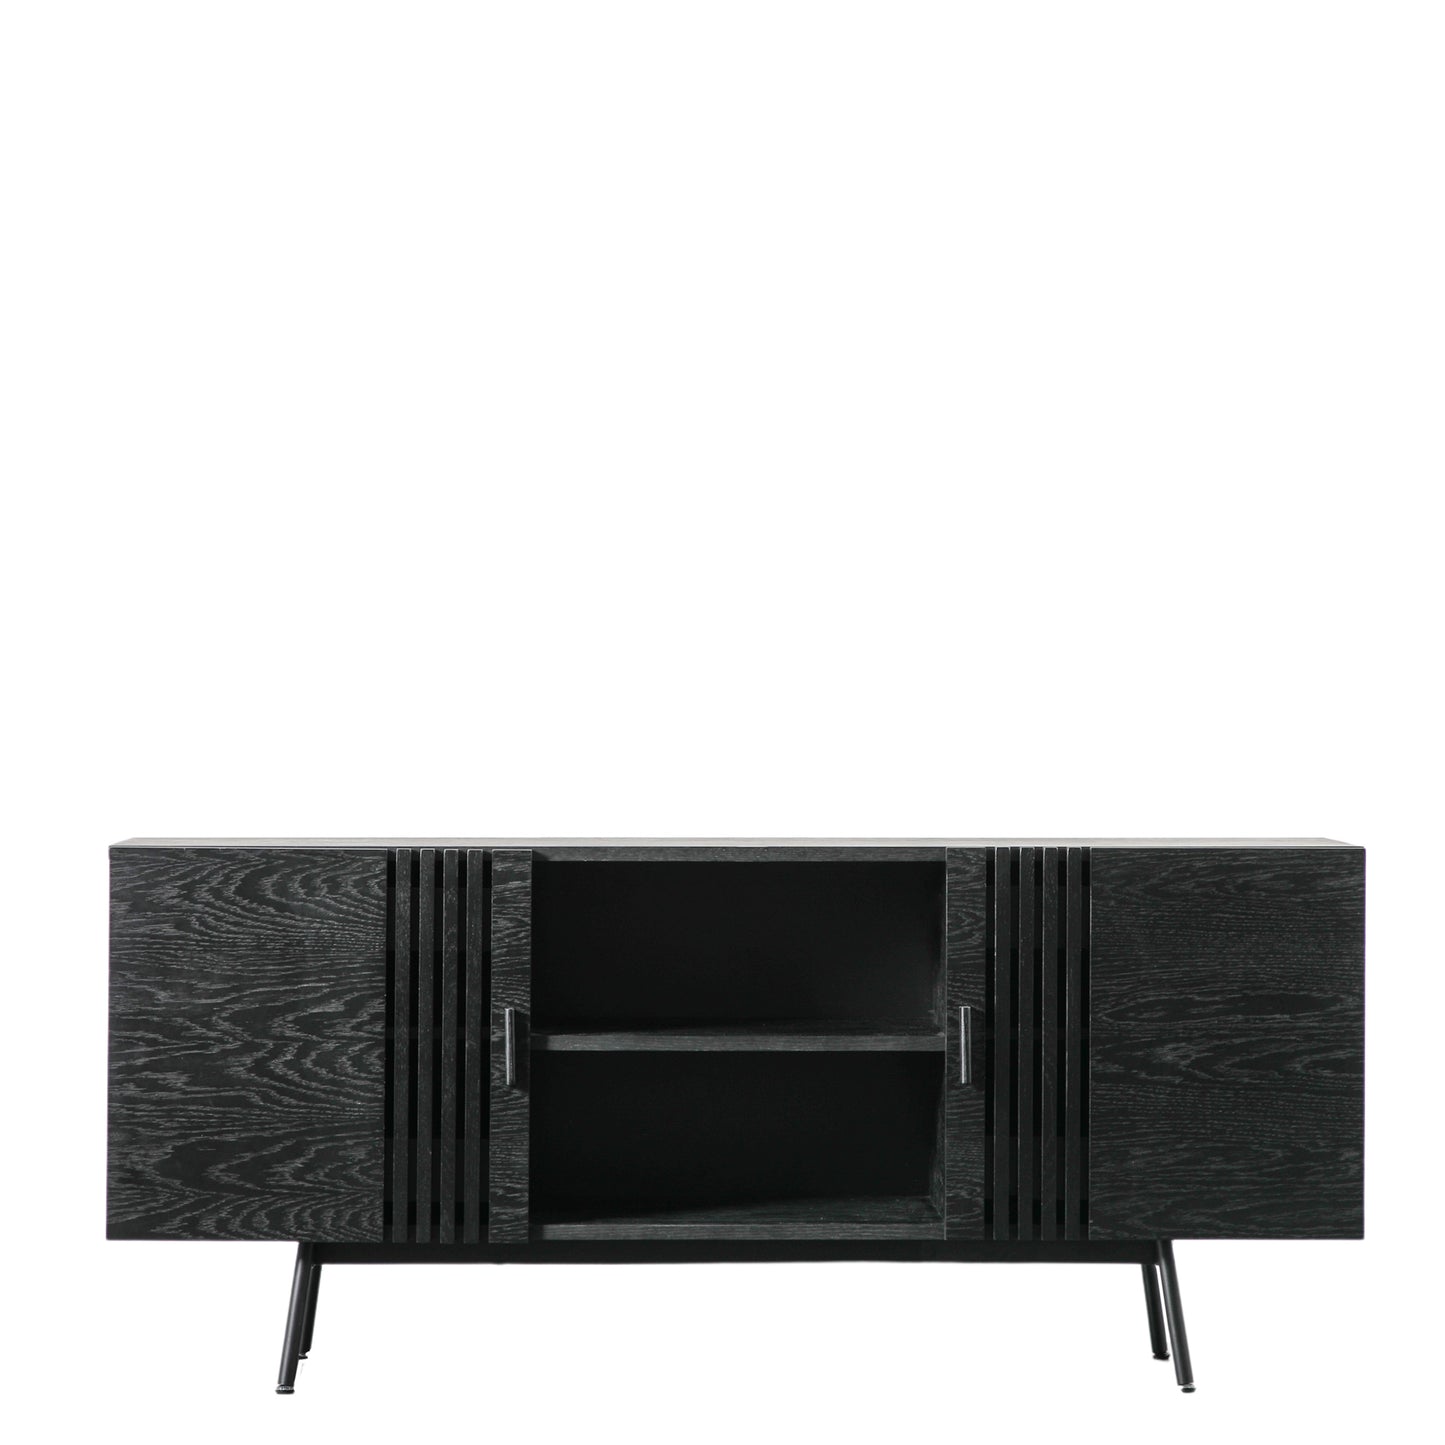 A black Holston Sideboard with shelves and drawers for home furniture.